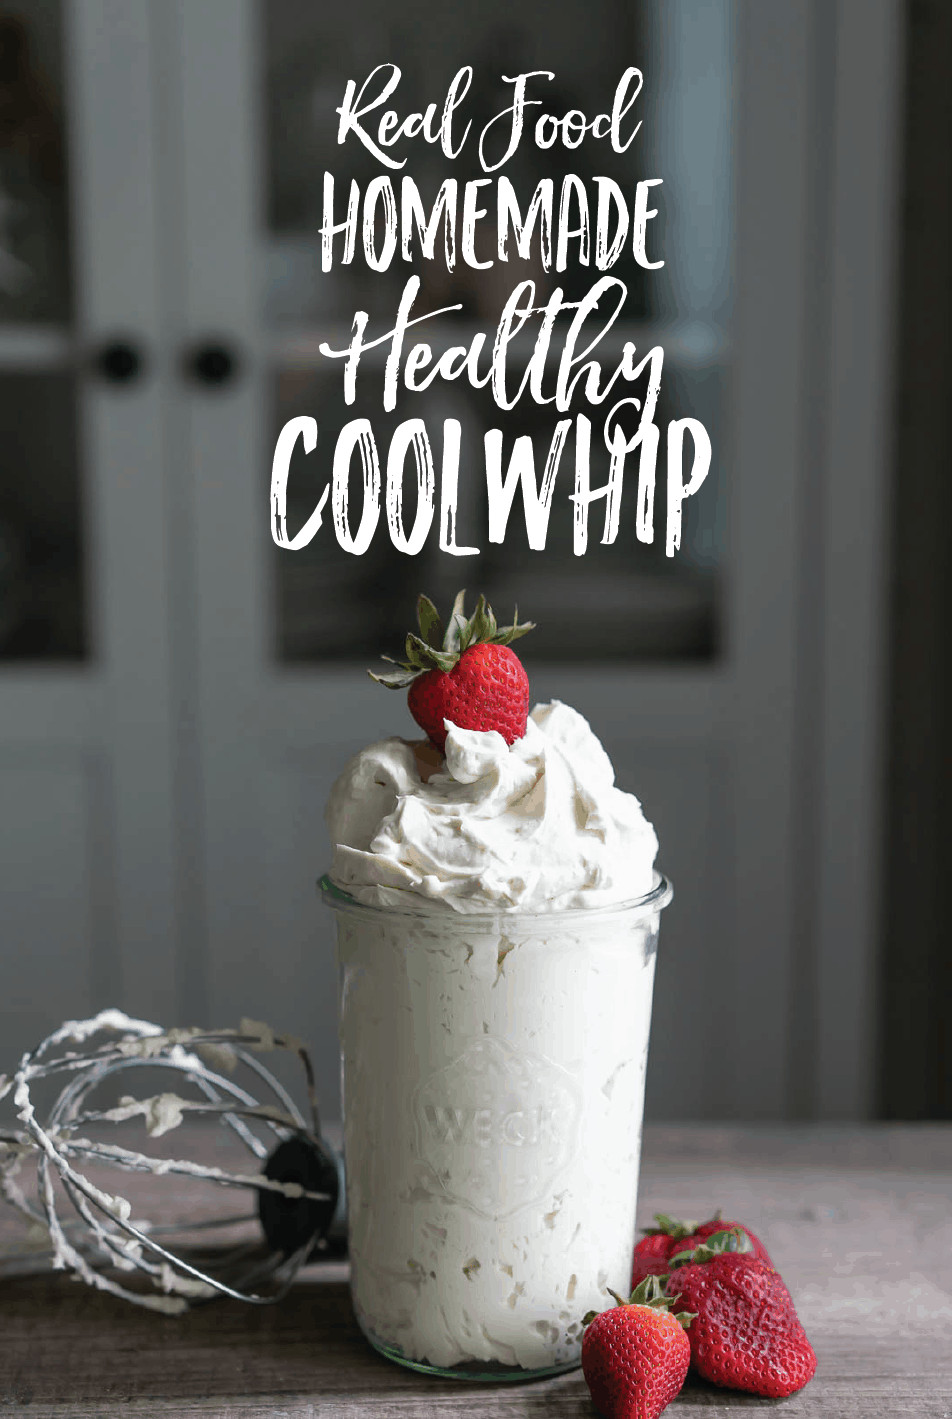 Cool Whip Keto Dessert
 Homemade Healthy Cool Whip Real Food with Low Carb